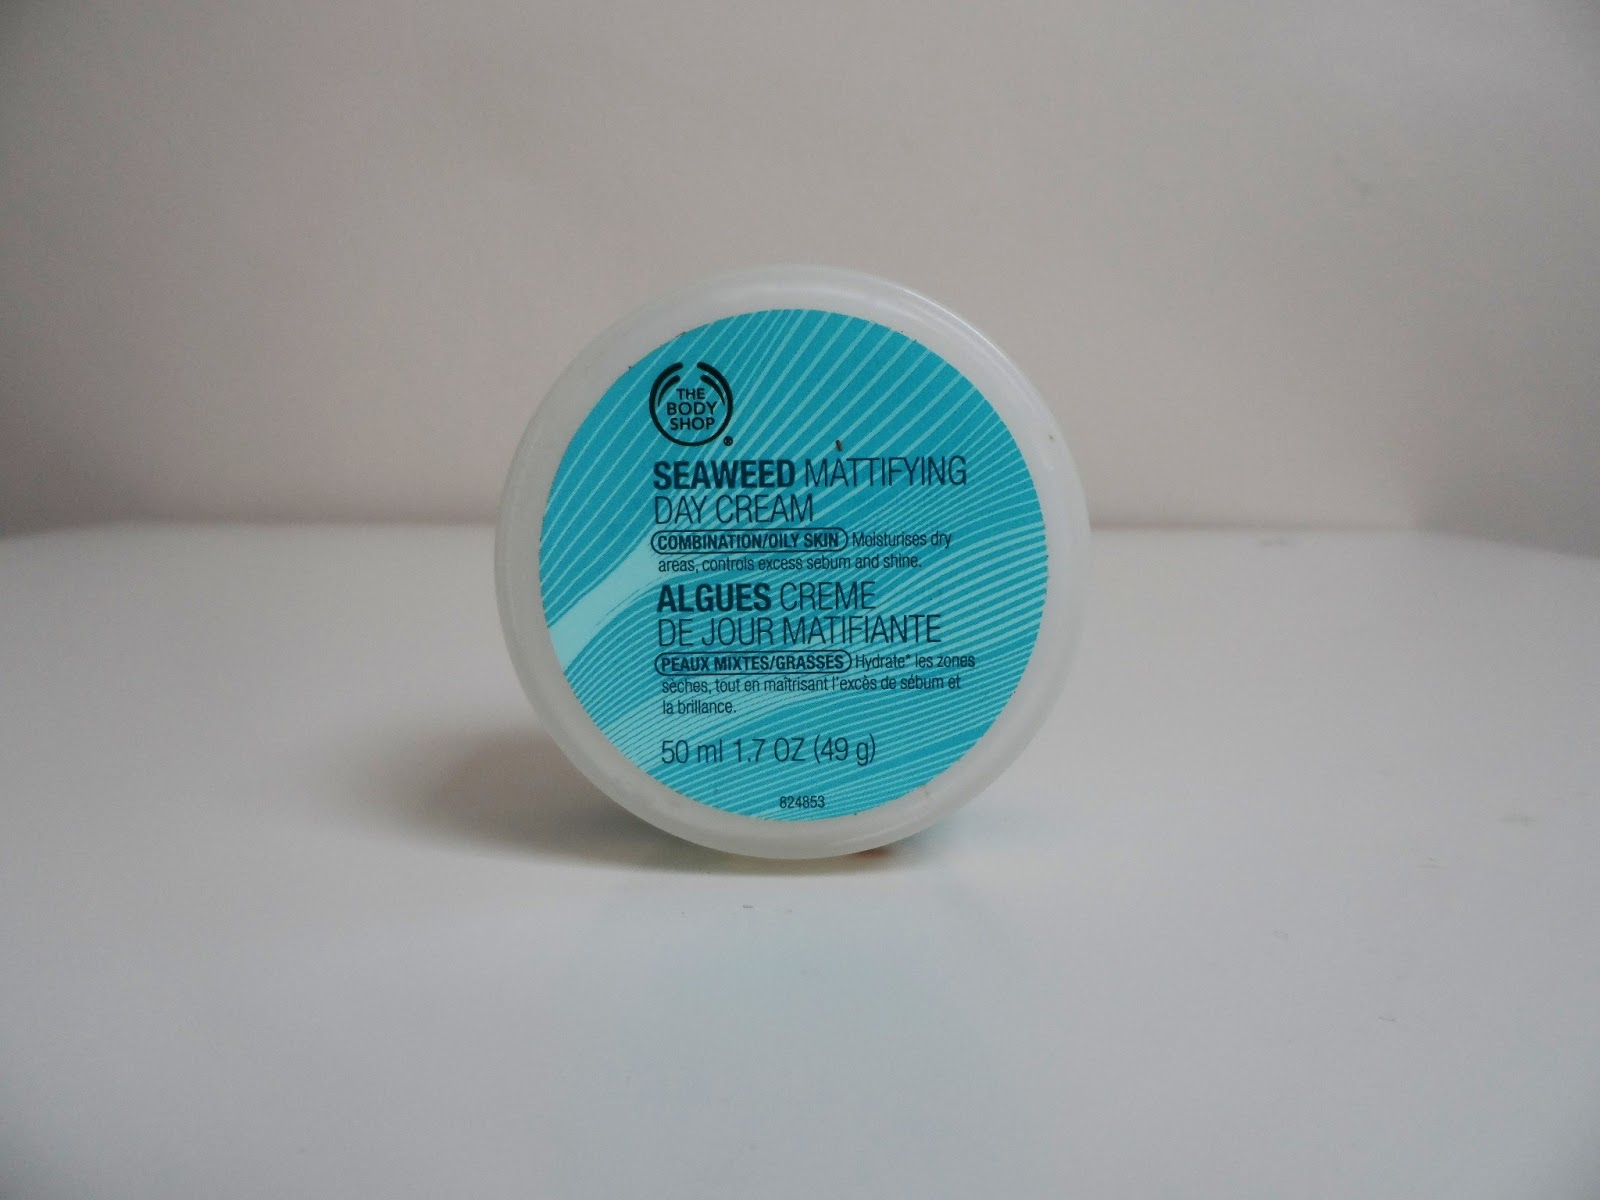 The Little Blush - Beauty, Fashion and Lifestyle Blog: The Body Shop ...